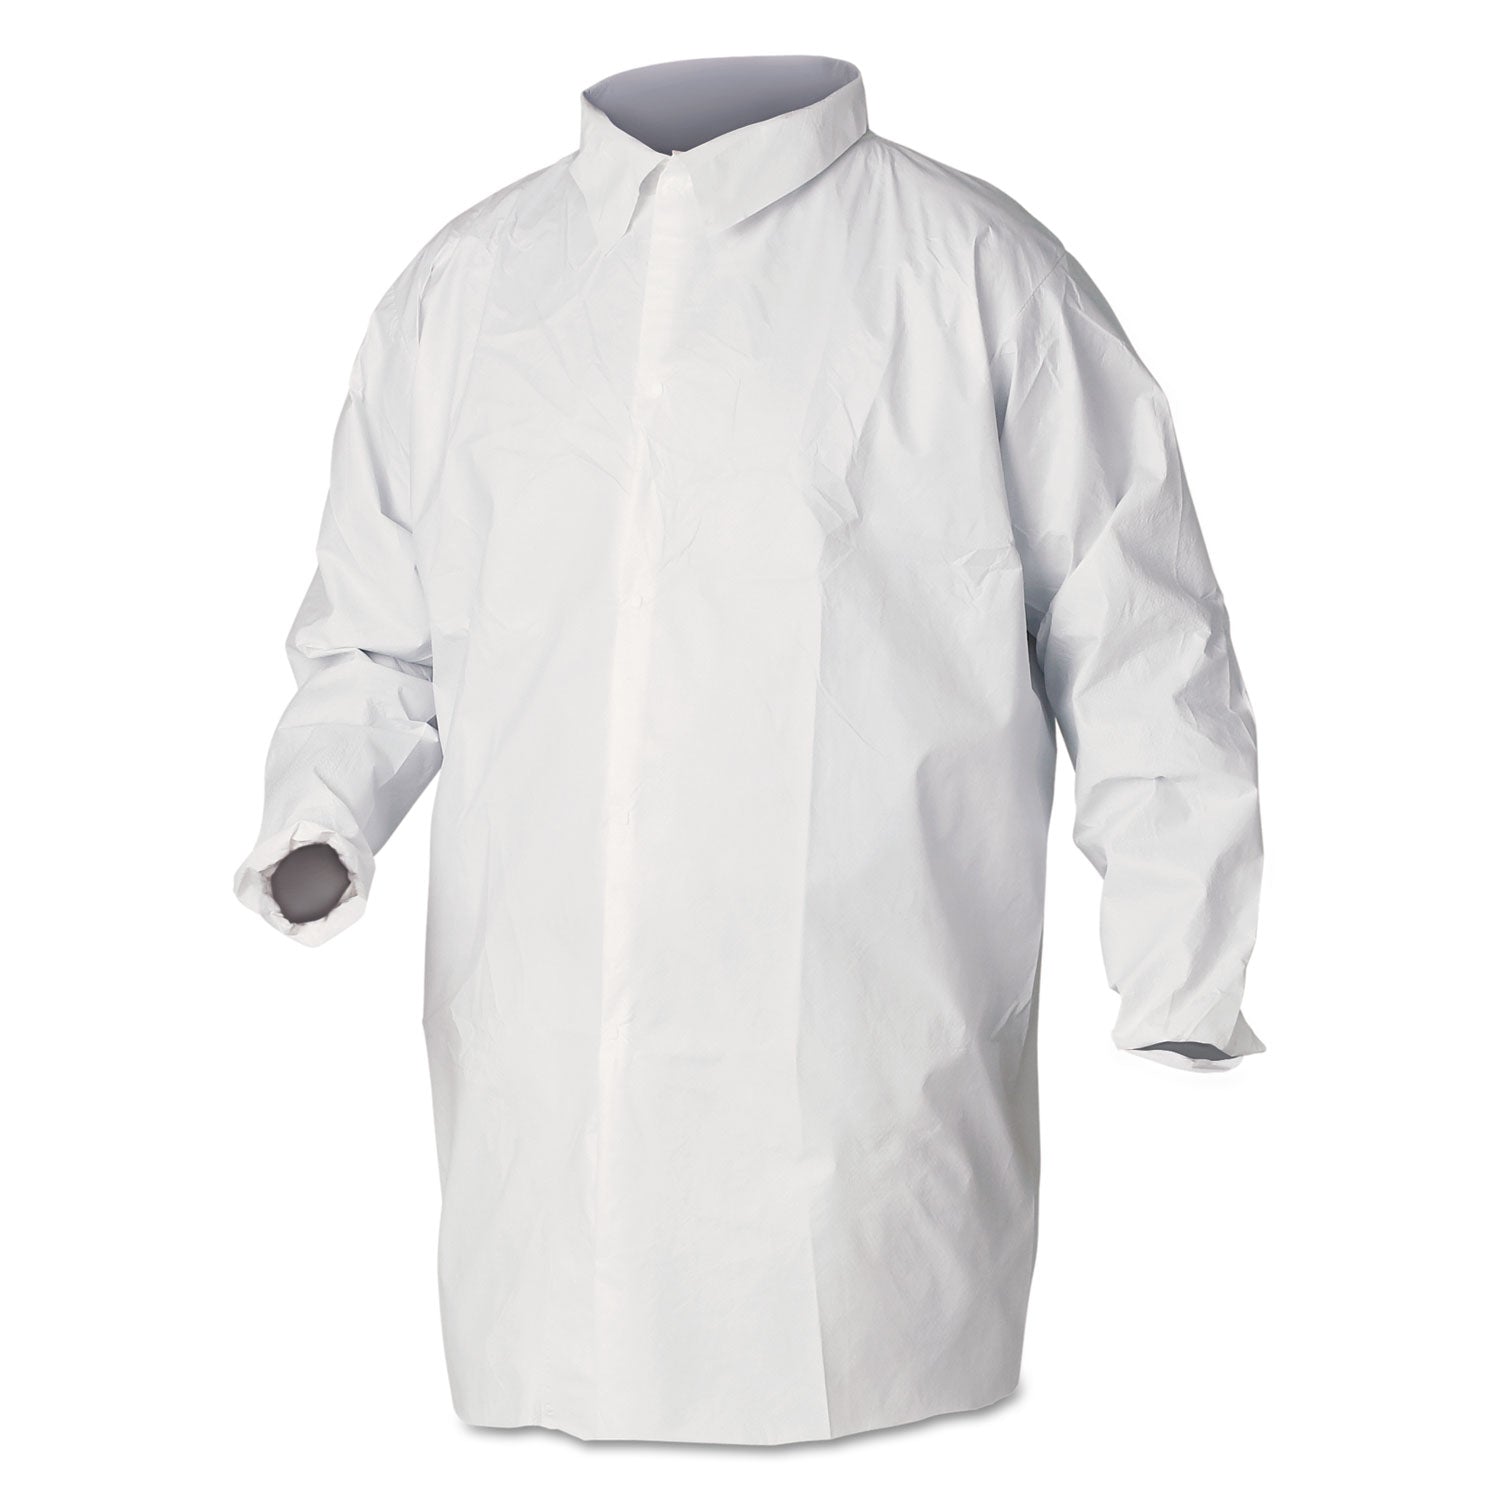 a40-liquid-and-particle-protection-lab-coats-large-white-30-carton_kcc44443 - 1